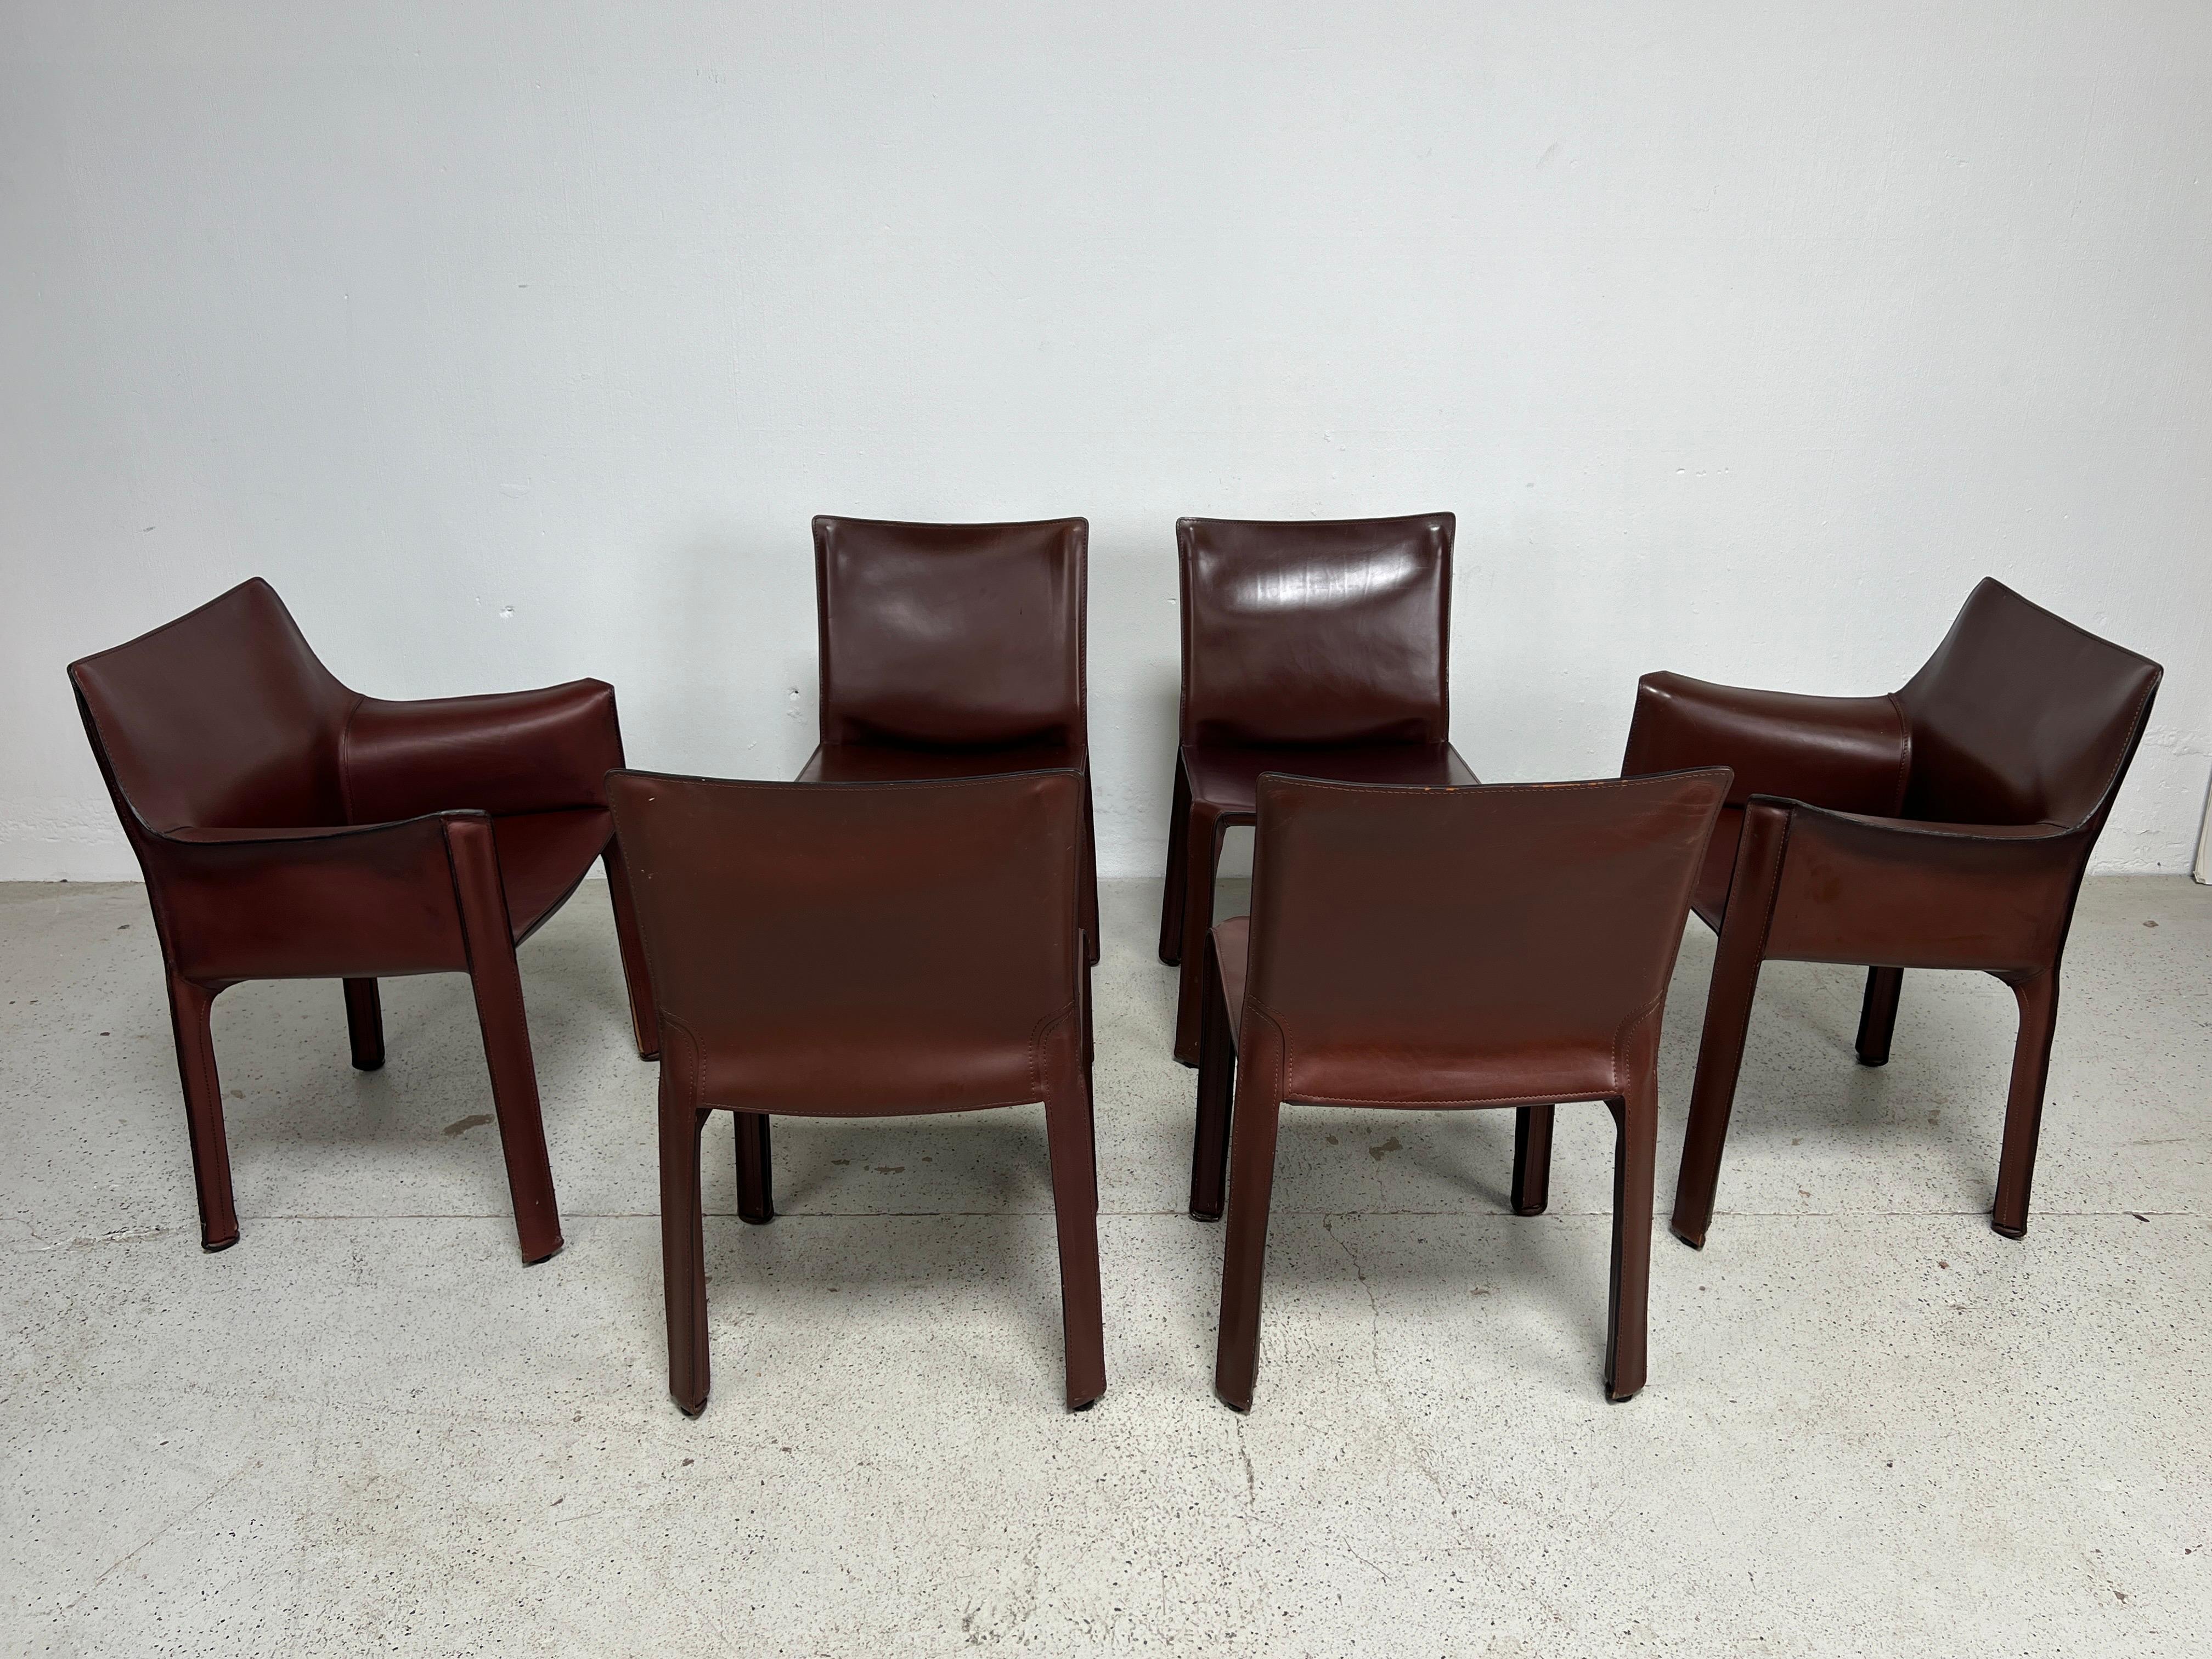 A beautiful set of patinated reddish brown leather Cab chairs by Mario Bellini for Cassina. 